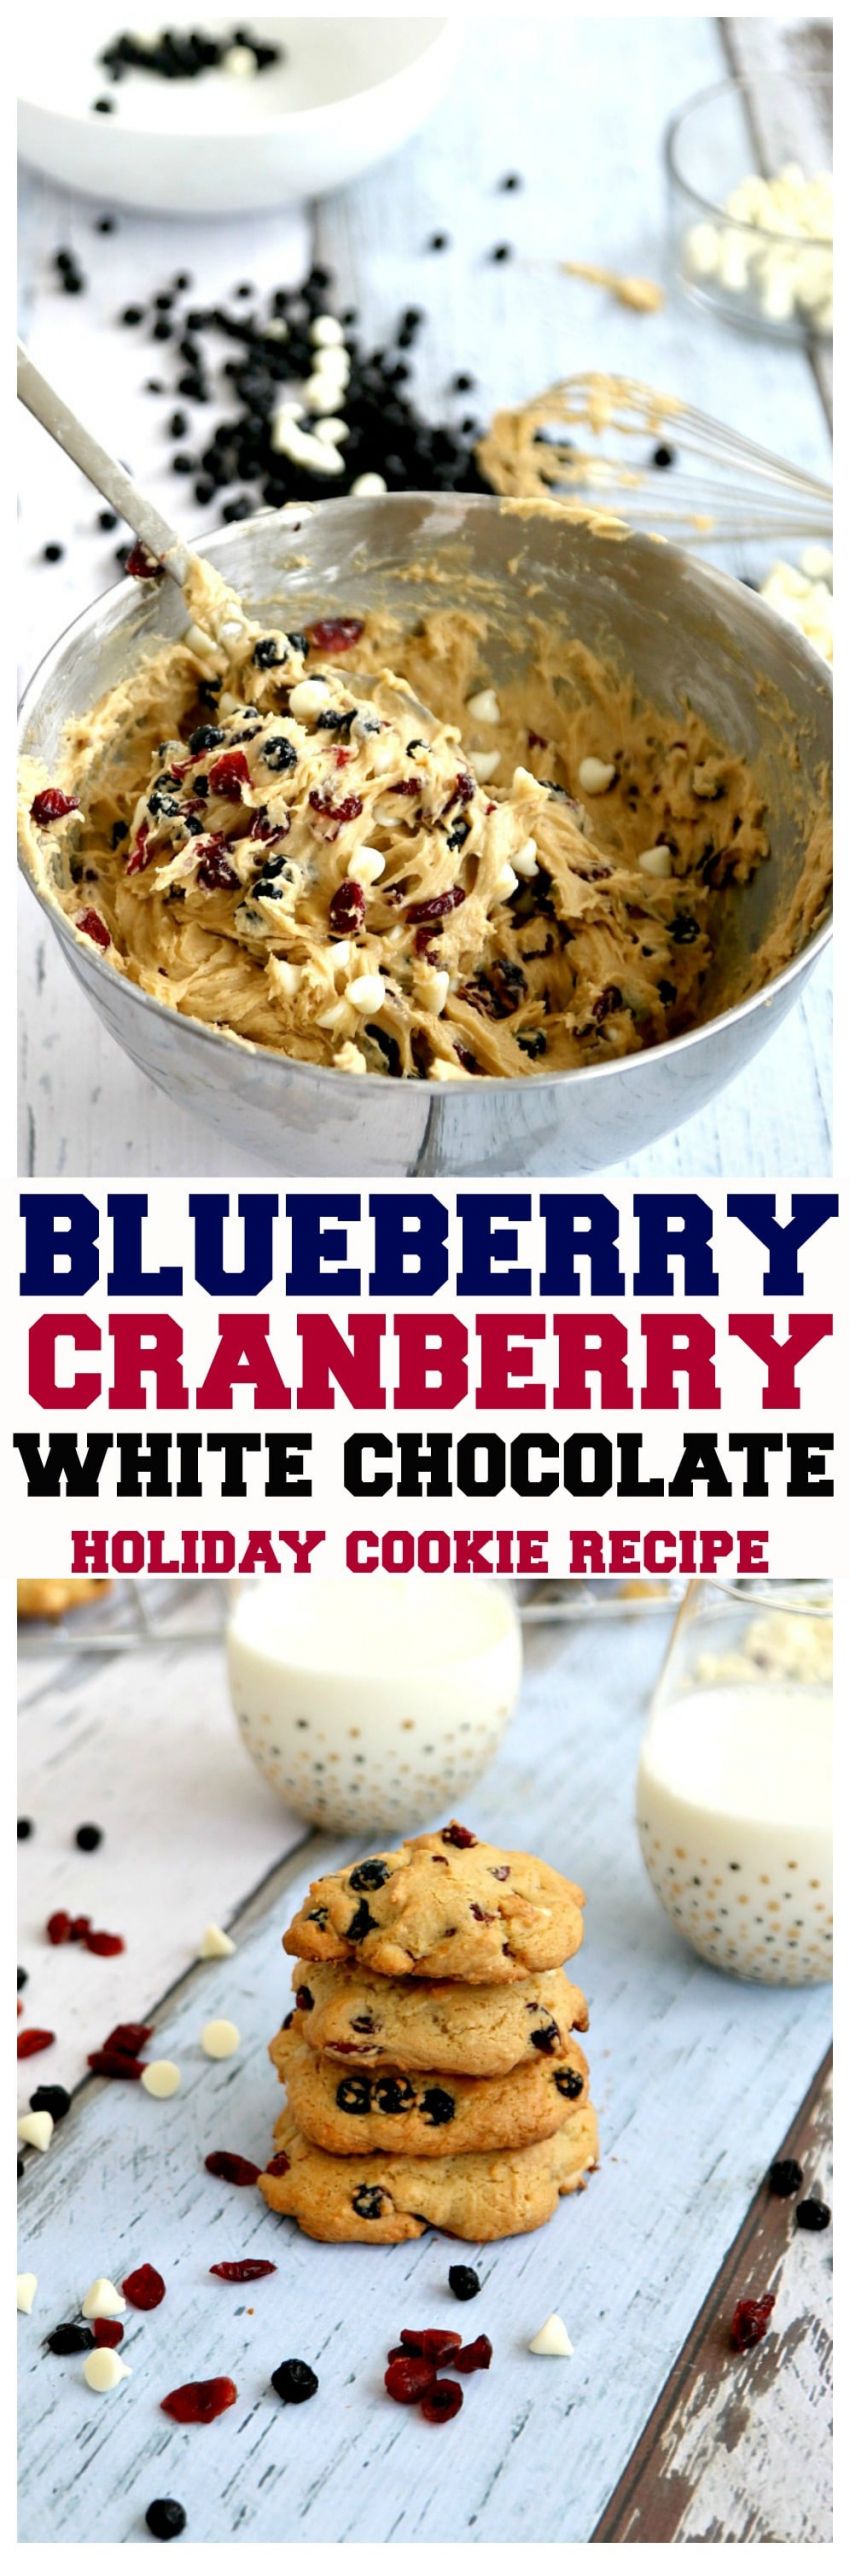 Blueberry White Chocolate Cookies
 Blueberry Cranberry & White Chocolate Cookies